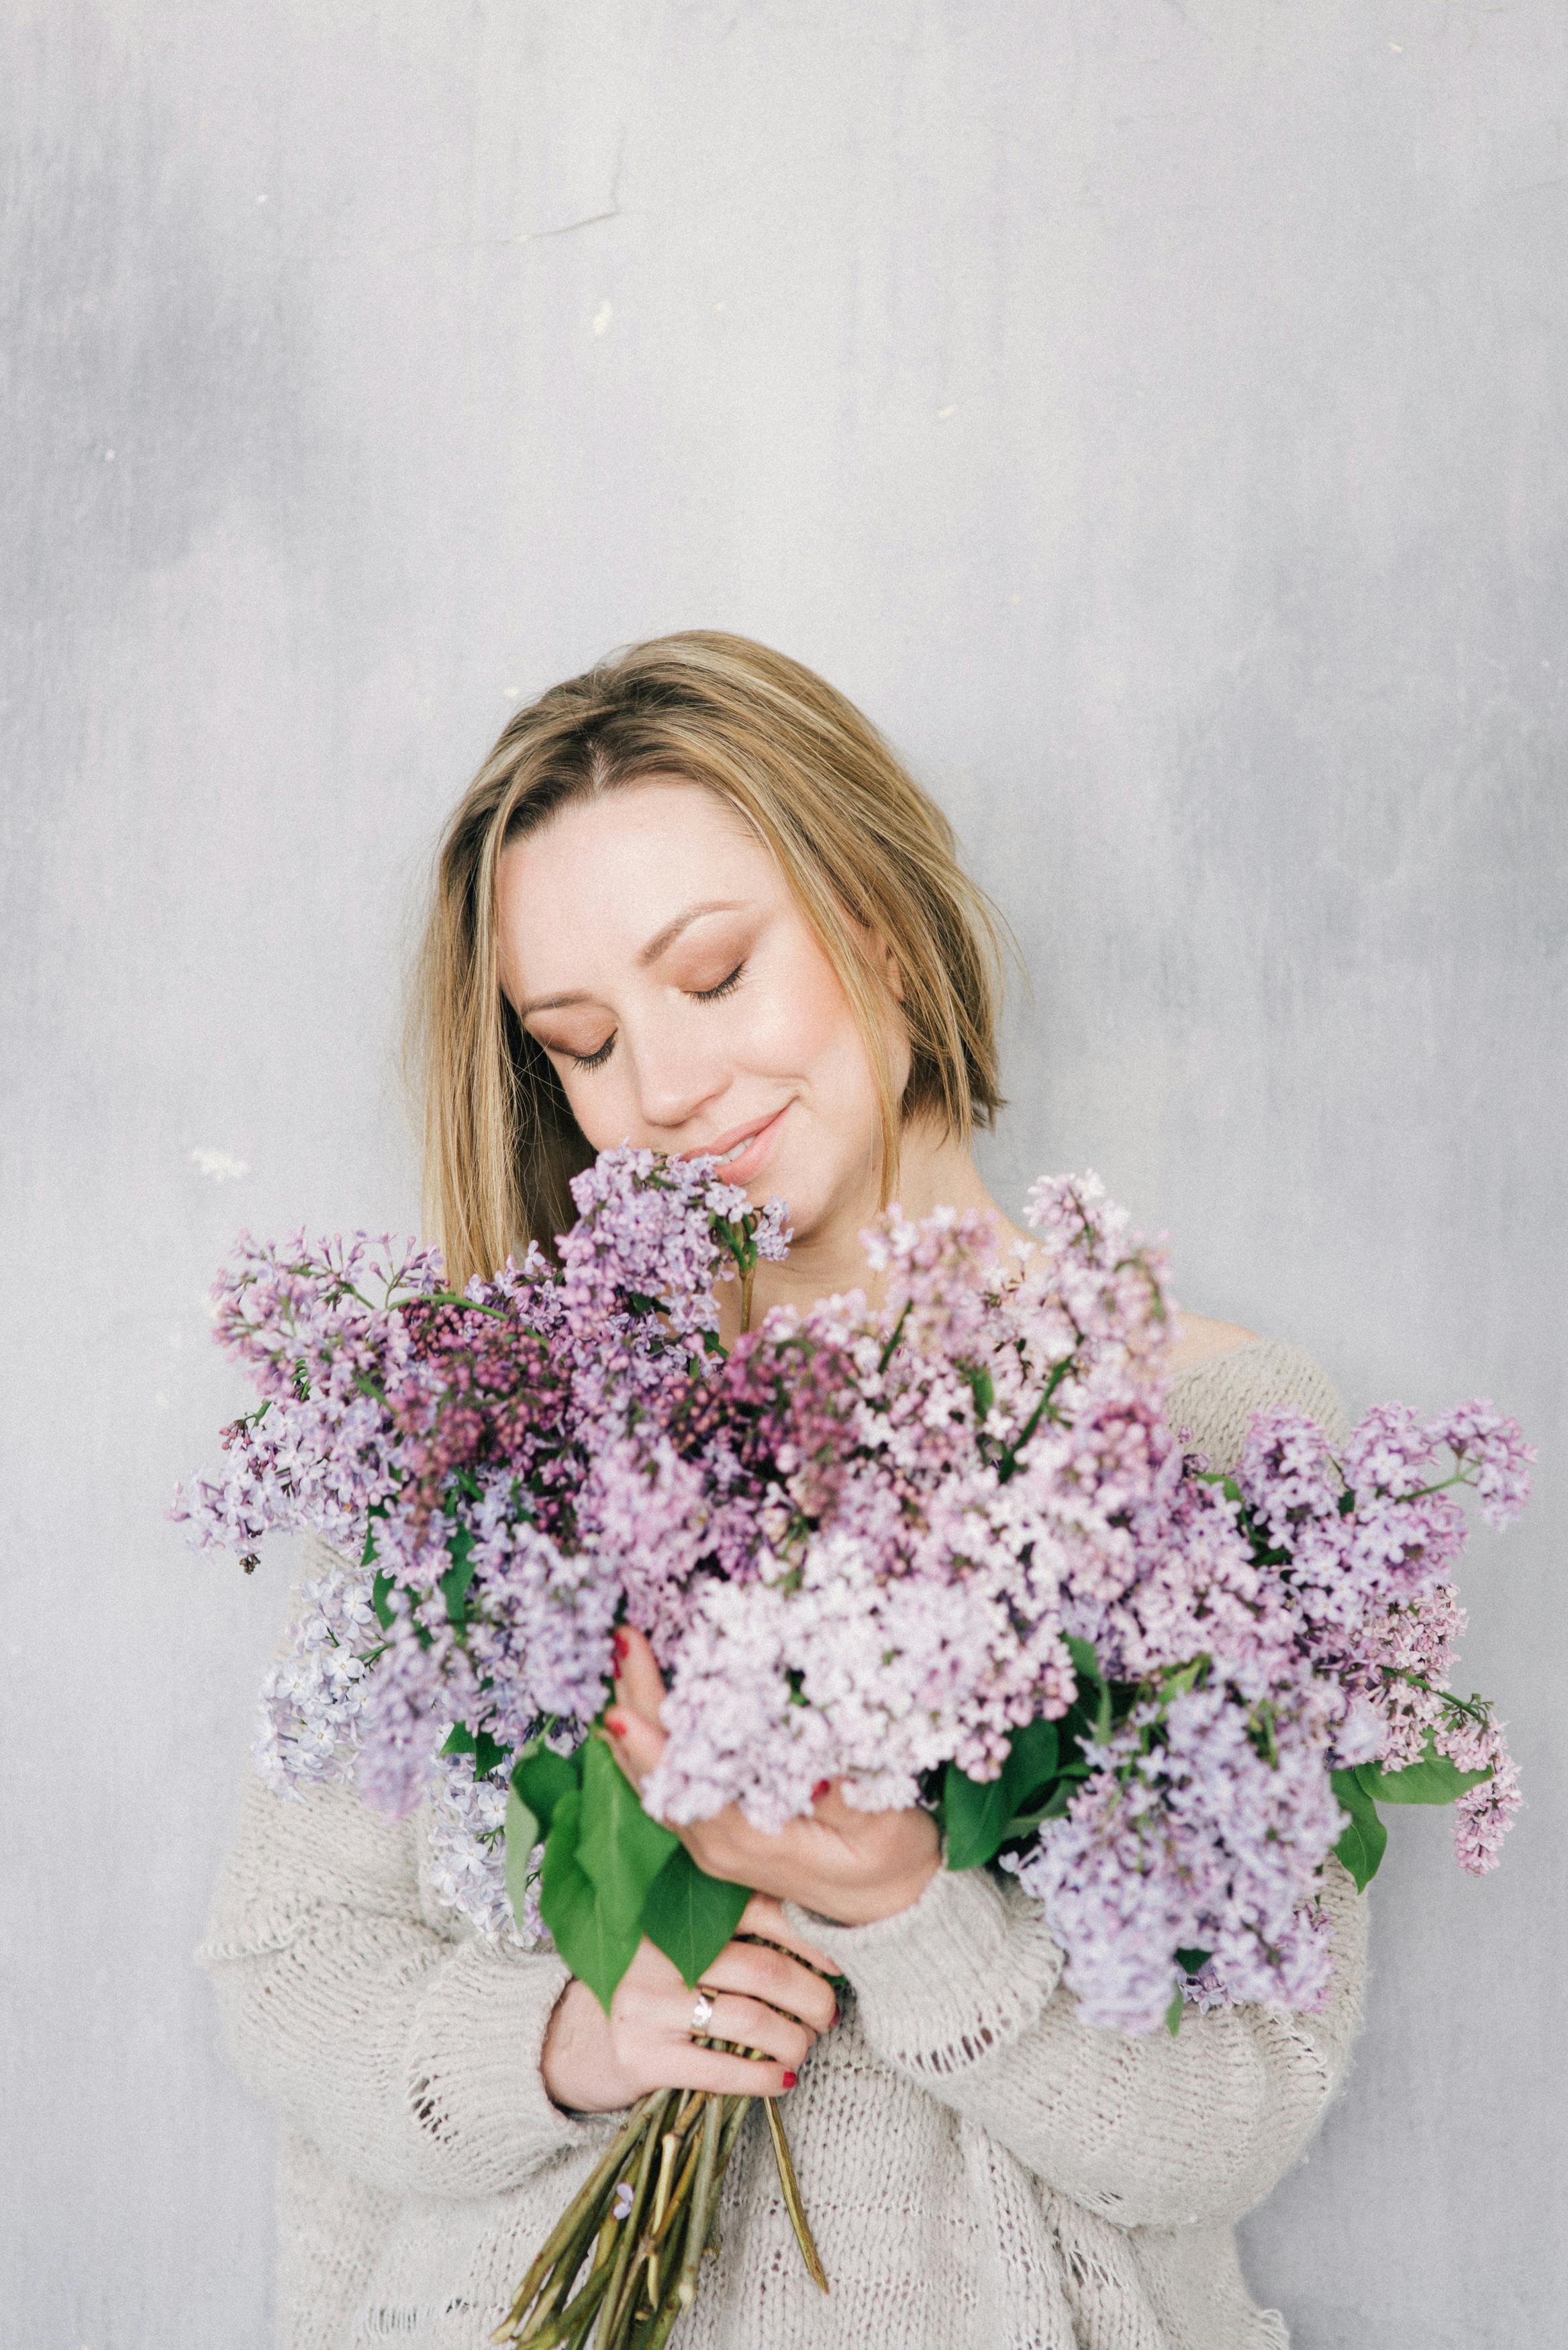 A Blonde Lady in Knitted Long Sleeves Holding Lilac Flowers